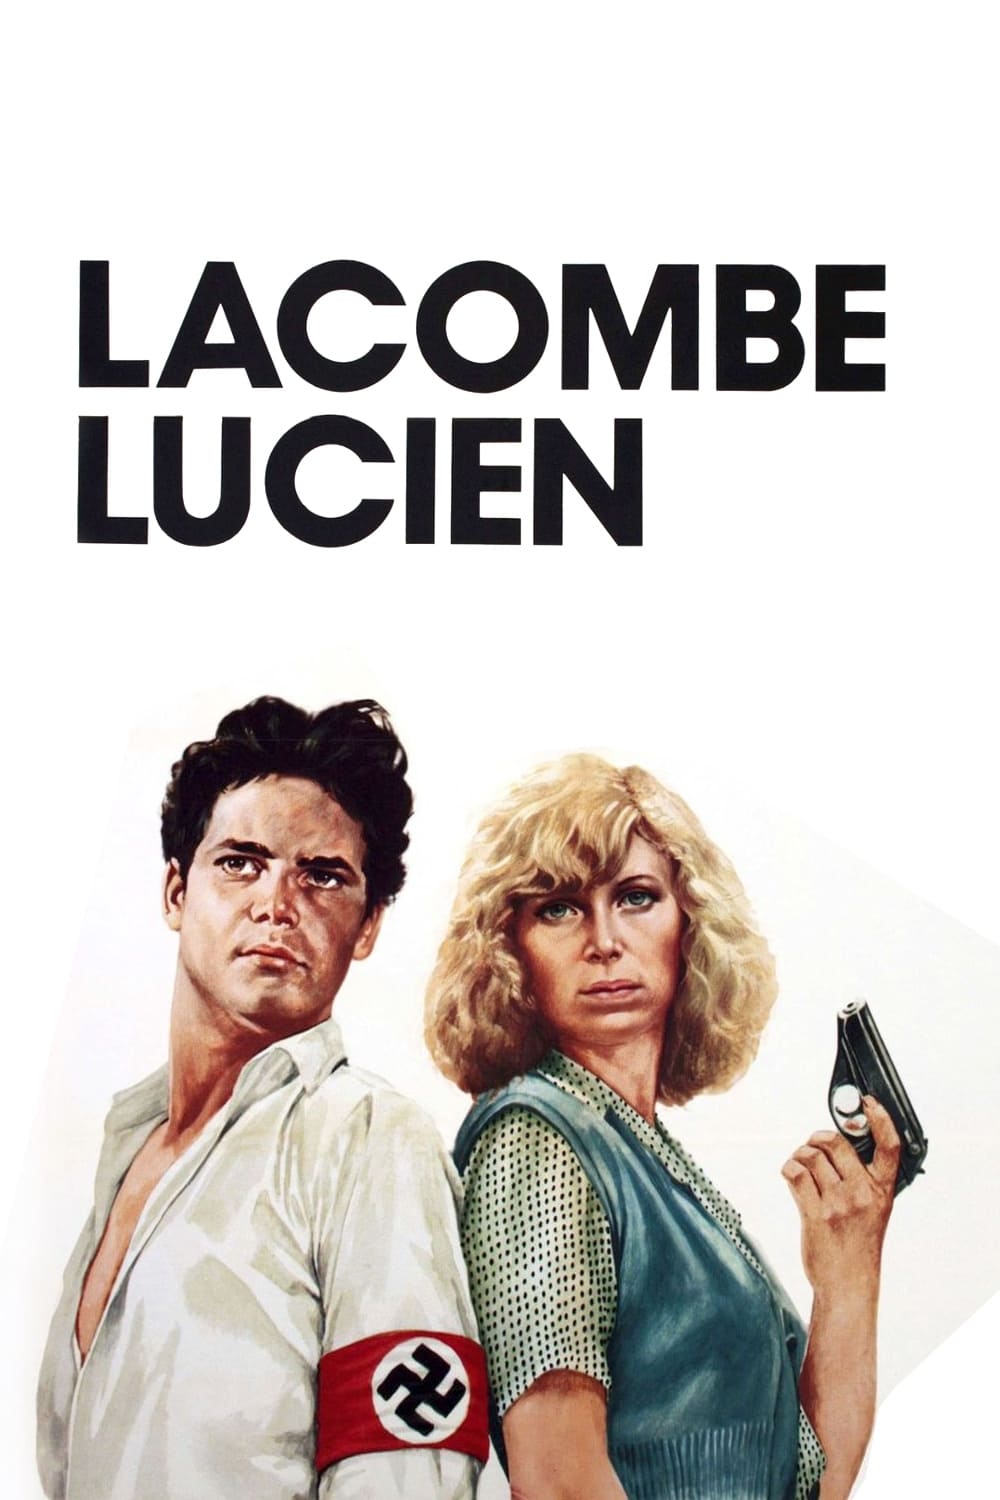 LACOMBE LUCIEN